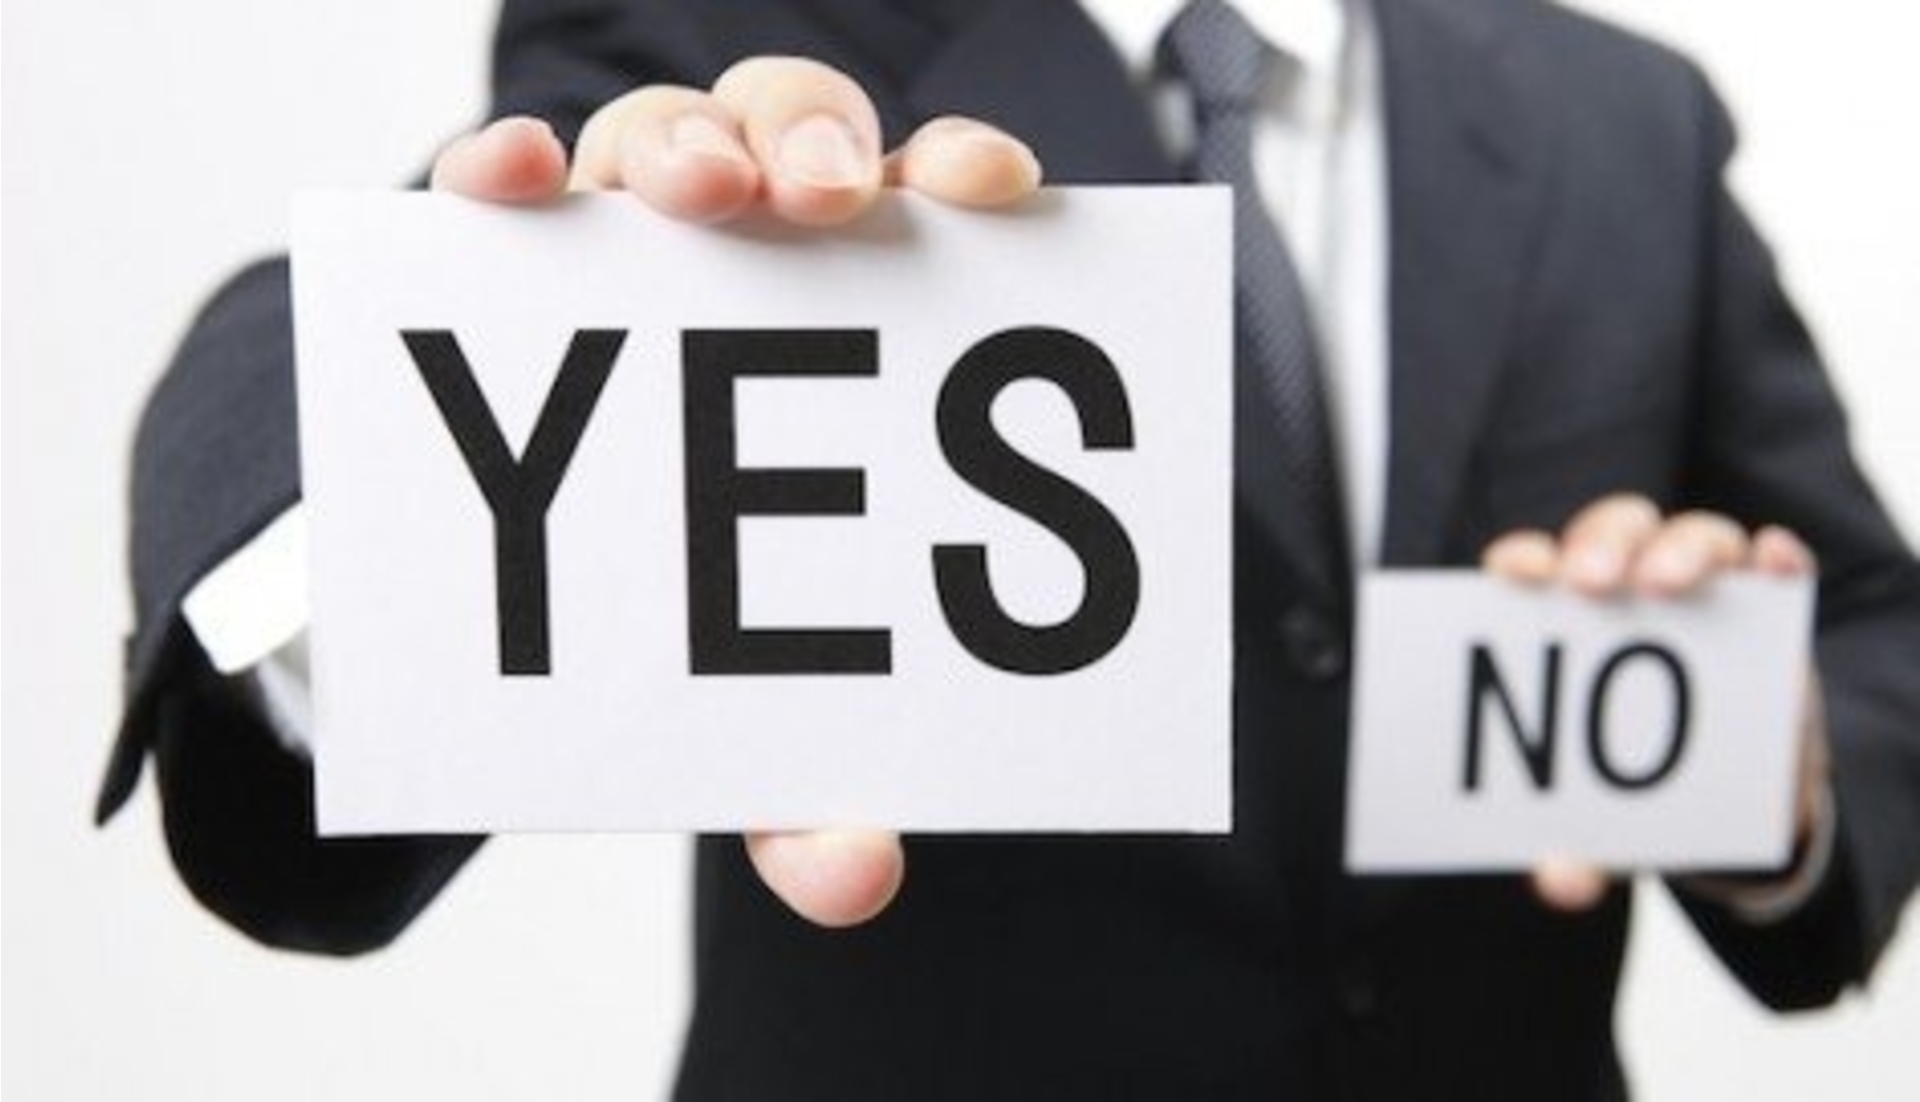 January Blues? Try The Power of "Yes"